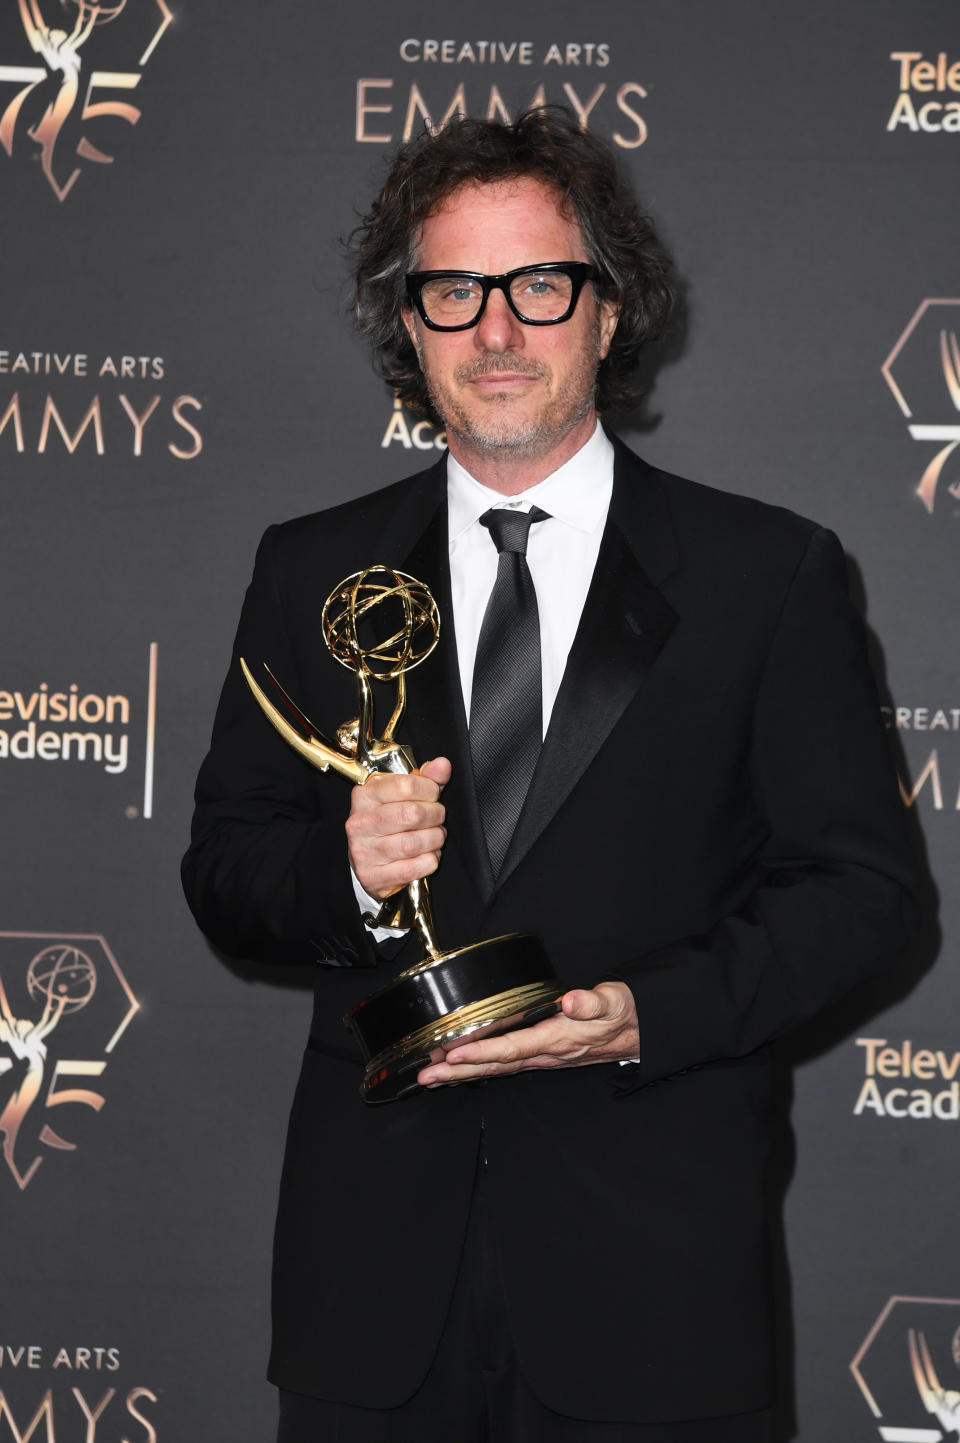 Davis Guggenheim at the 75th Creative Arts Emmy Awards held at the Peacock Theater at L.A. Live on January 7, 2023 in Los Angeles, California.